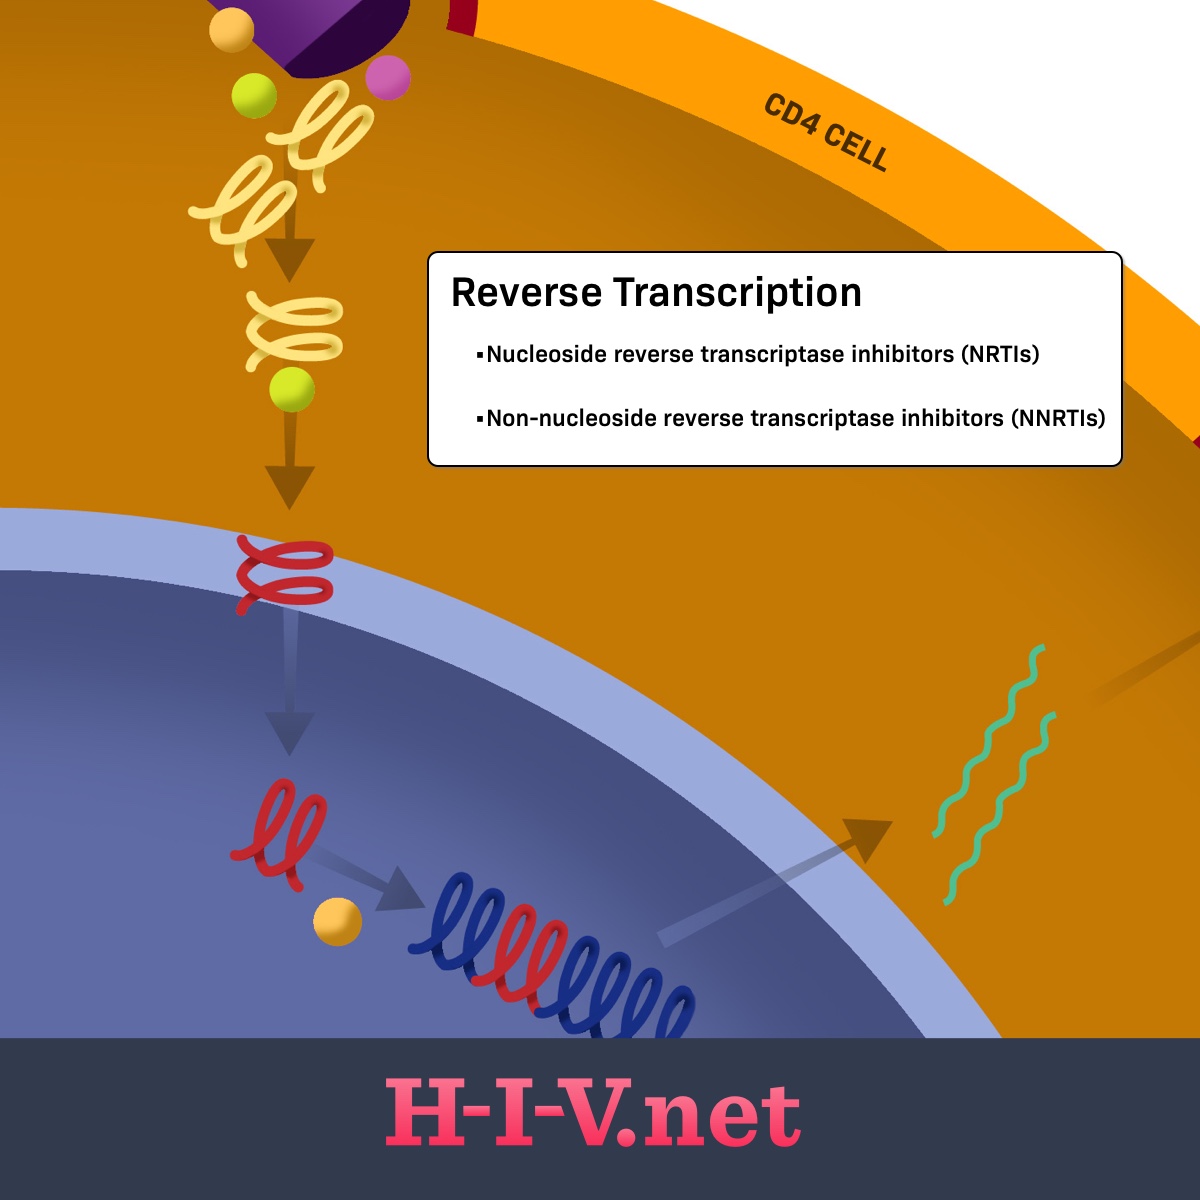 NRTIs target reverse transcription in the CD4 Cell in the HIV life cycle